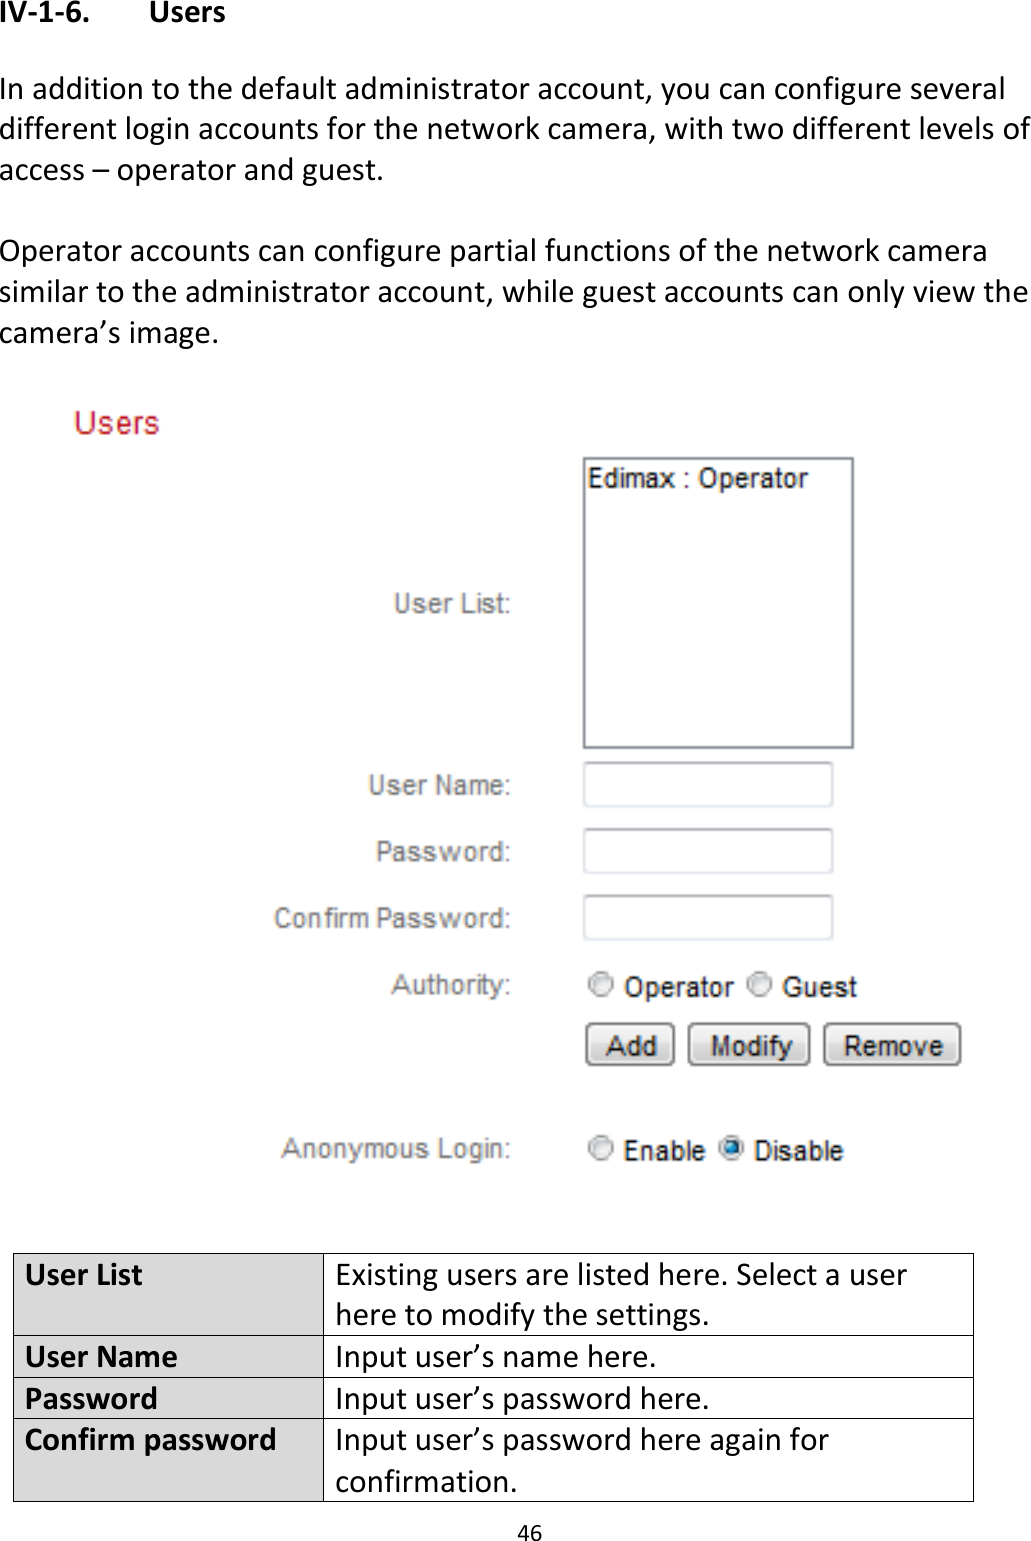 46  IV-1-6.   Users  In addition to the default administrator account, you can configure several different login accounts for the network camera, with two different levels of access – operator and guest.  Operator accounts can configure partial functions of the network camera similar to the administrator account, while guest accounts can only view the camera’s image.    User List Existing users are listed here. Select a user here to modify the settings. User Name Input user’s name here. Password Input user’s password here. Confirm password  Input user’s password here again for confirmation. 